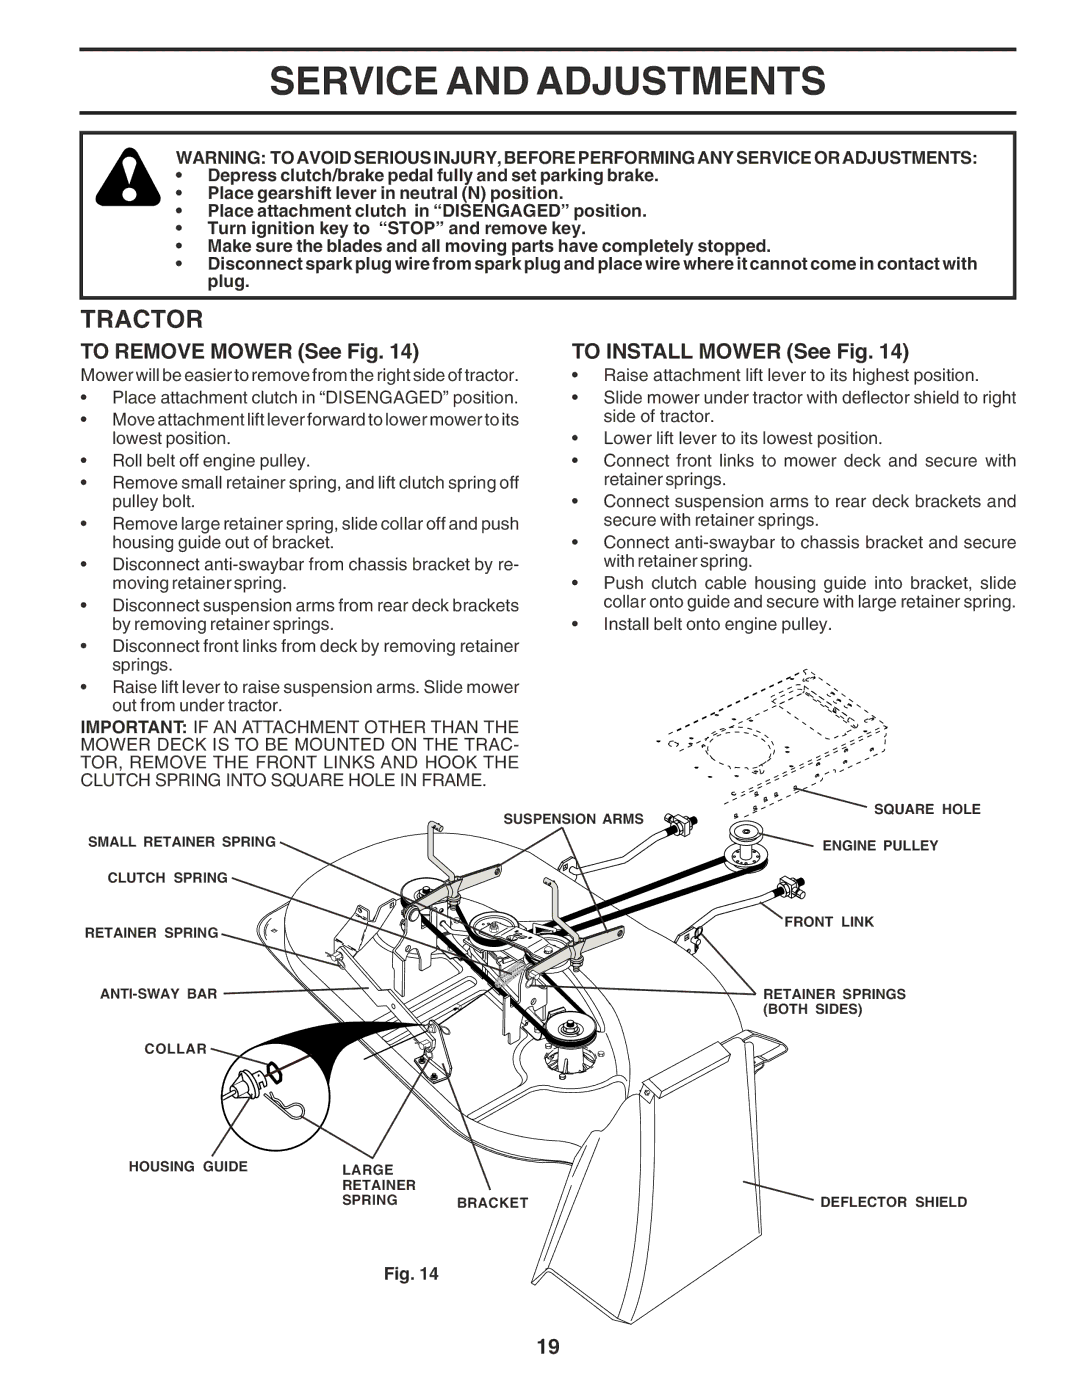 Weed Eater 183670 manual Service and Adjustments, To Remove Mower See Fig, To Install Mower See Fig 